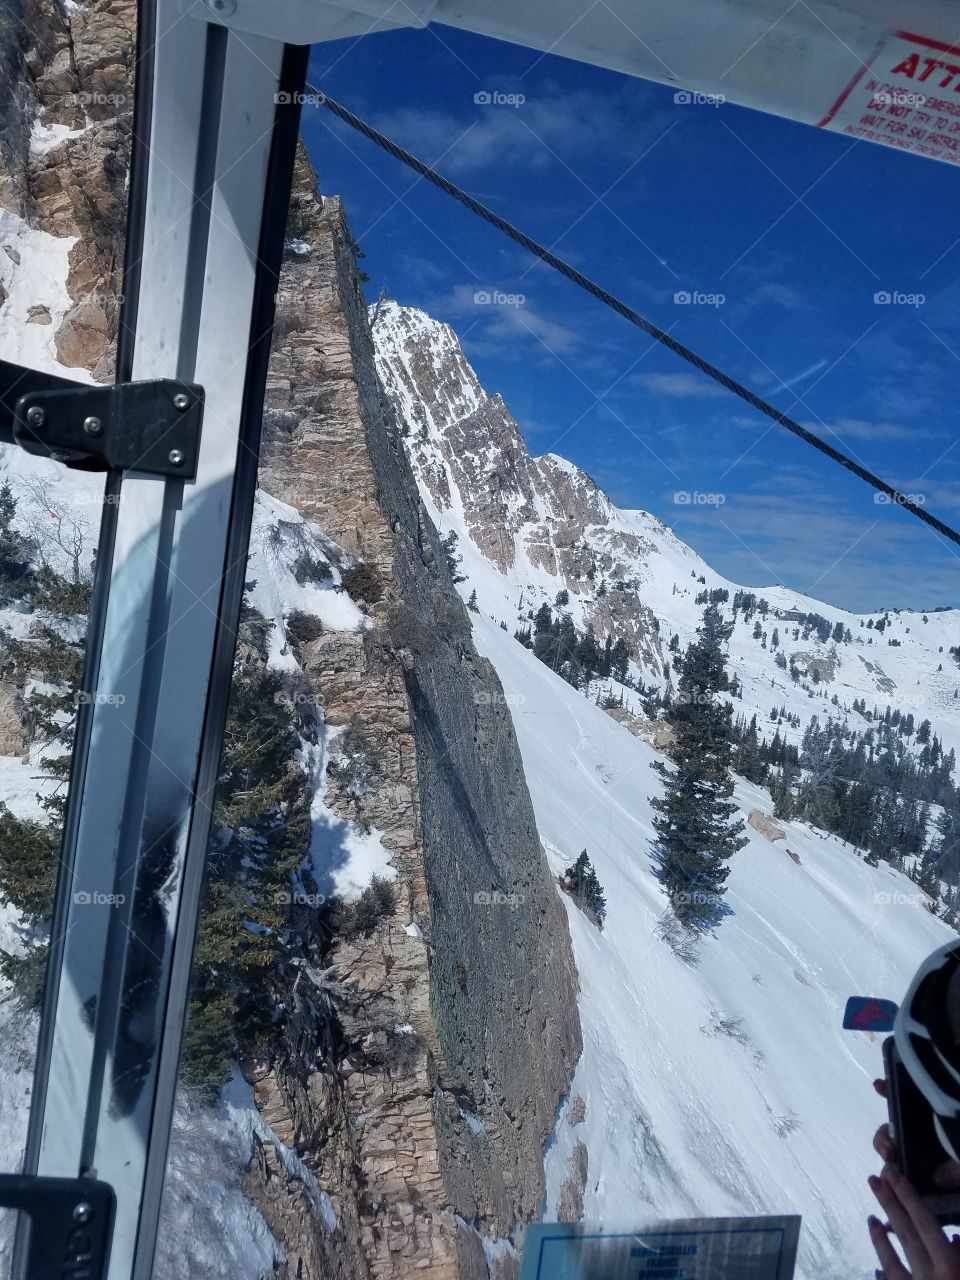 snowboarding in snow basin- view from the gondola.